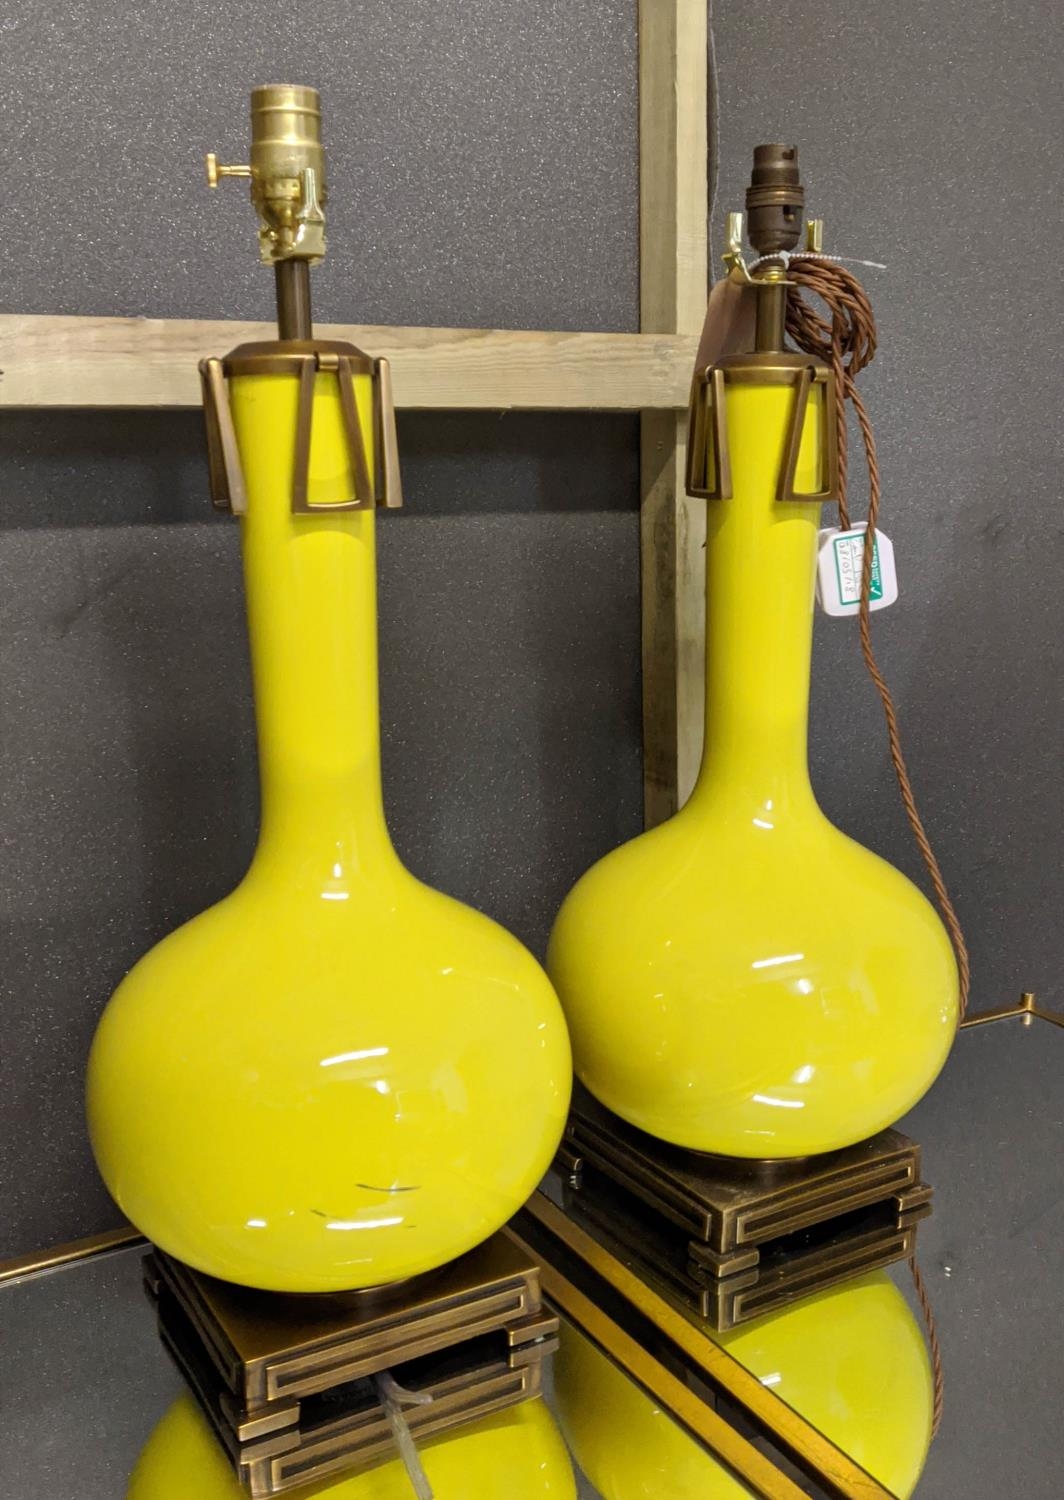 PAOLO MOSCHINO ADESSA TABLE LAMPS, a pair, citron finish, 60cm H. (2) - Image 2 of 4